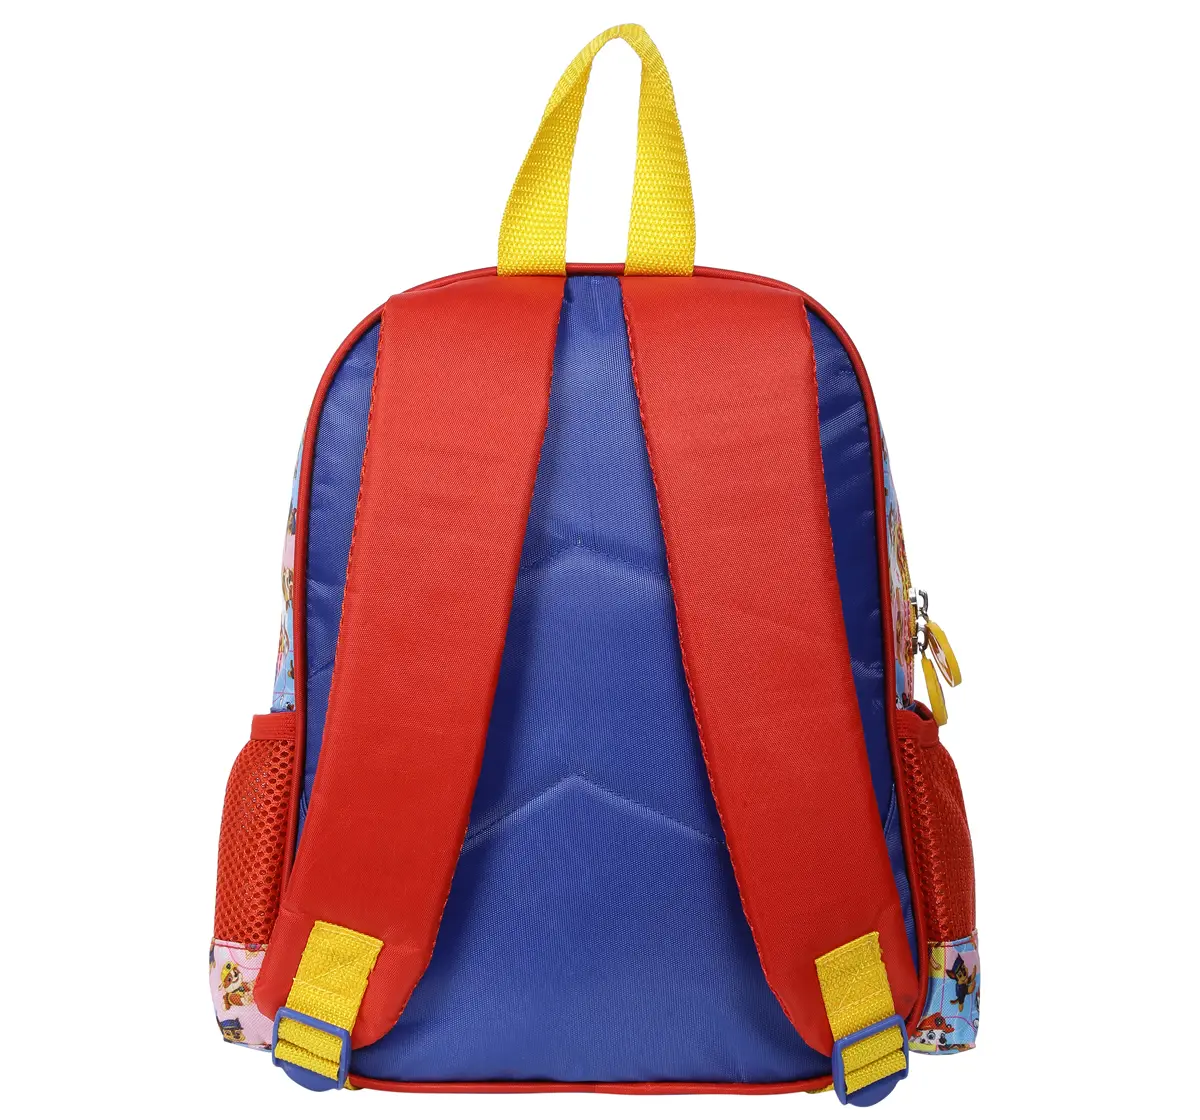 Simba Paw Patrol Easy as ABC 12 Backpack Multicolor 3Y+